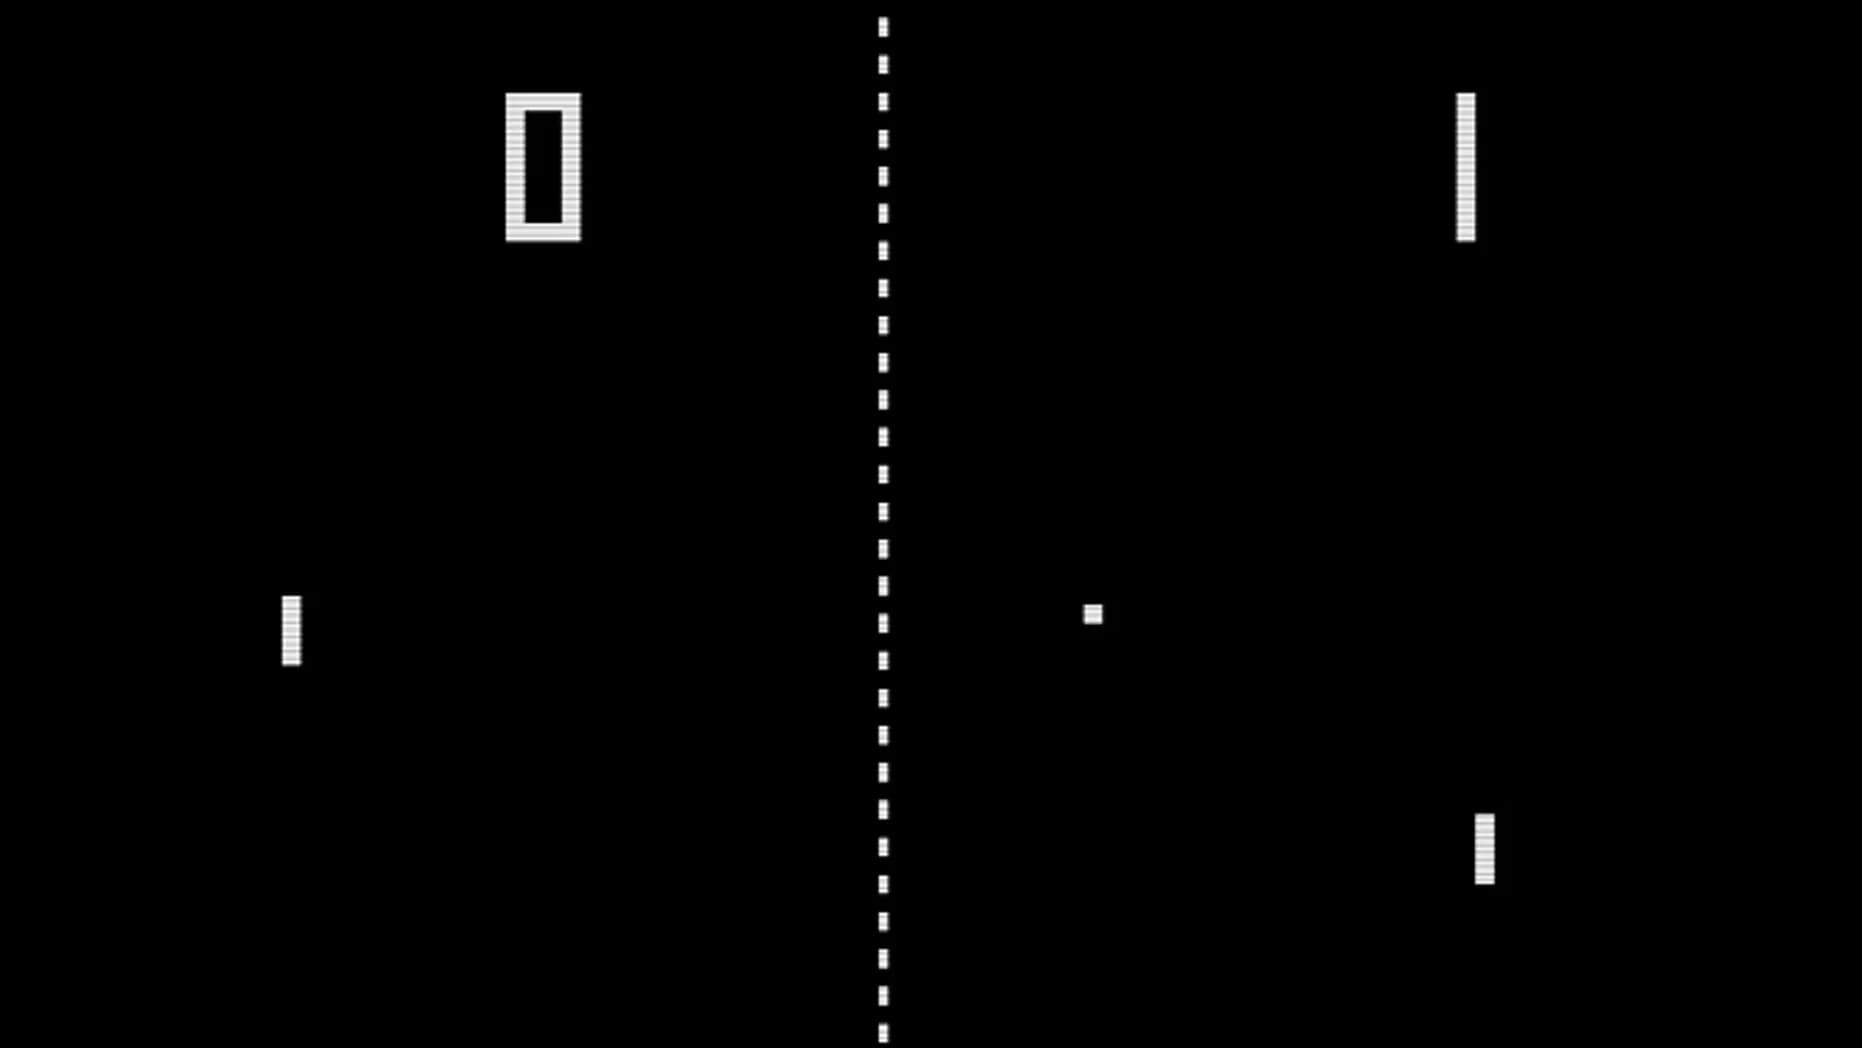 A screengrab of the video game pong